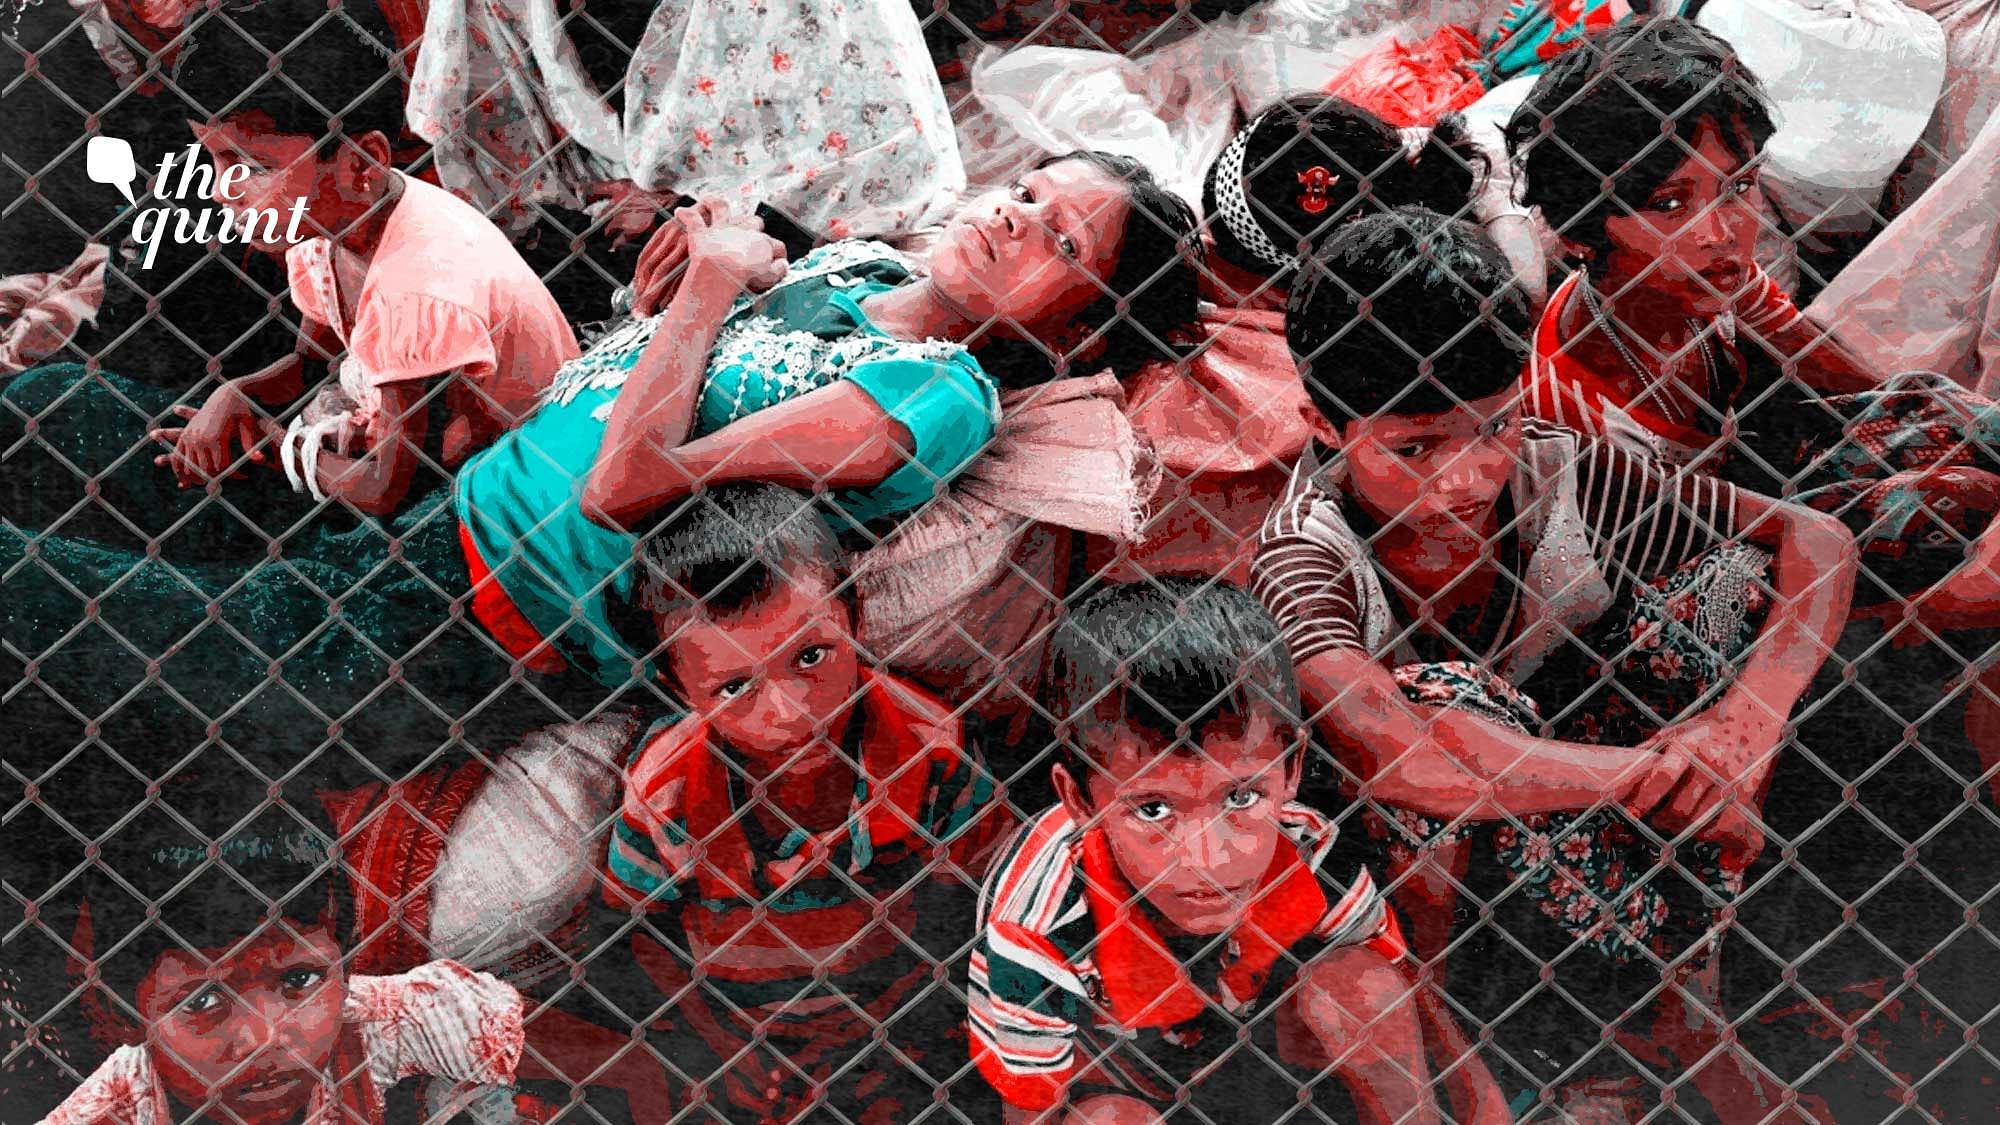 On 8 April, Thursday, the Supreme Court of India allowed the central government to deport the hundreds of Rohingya refugees currently detained in Jammu’s sub-jail, back to conflict-hit Myanmar.